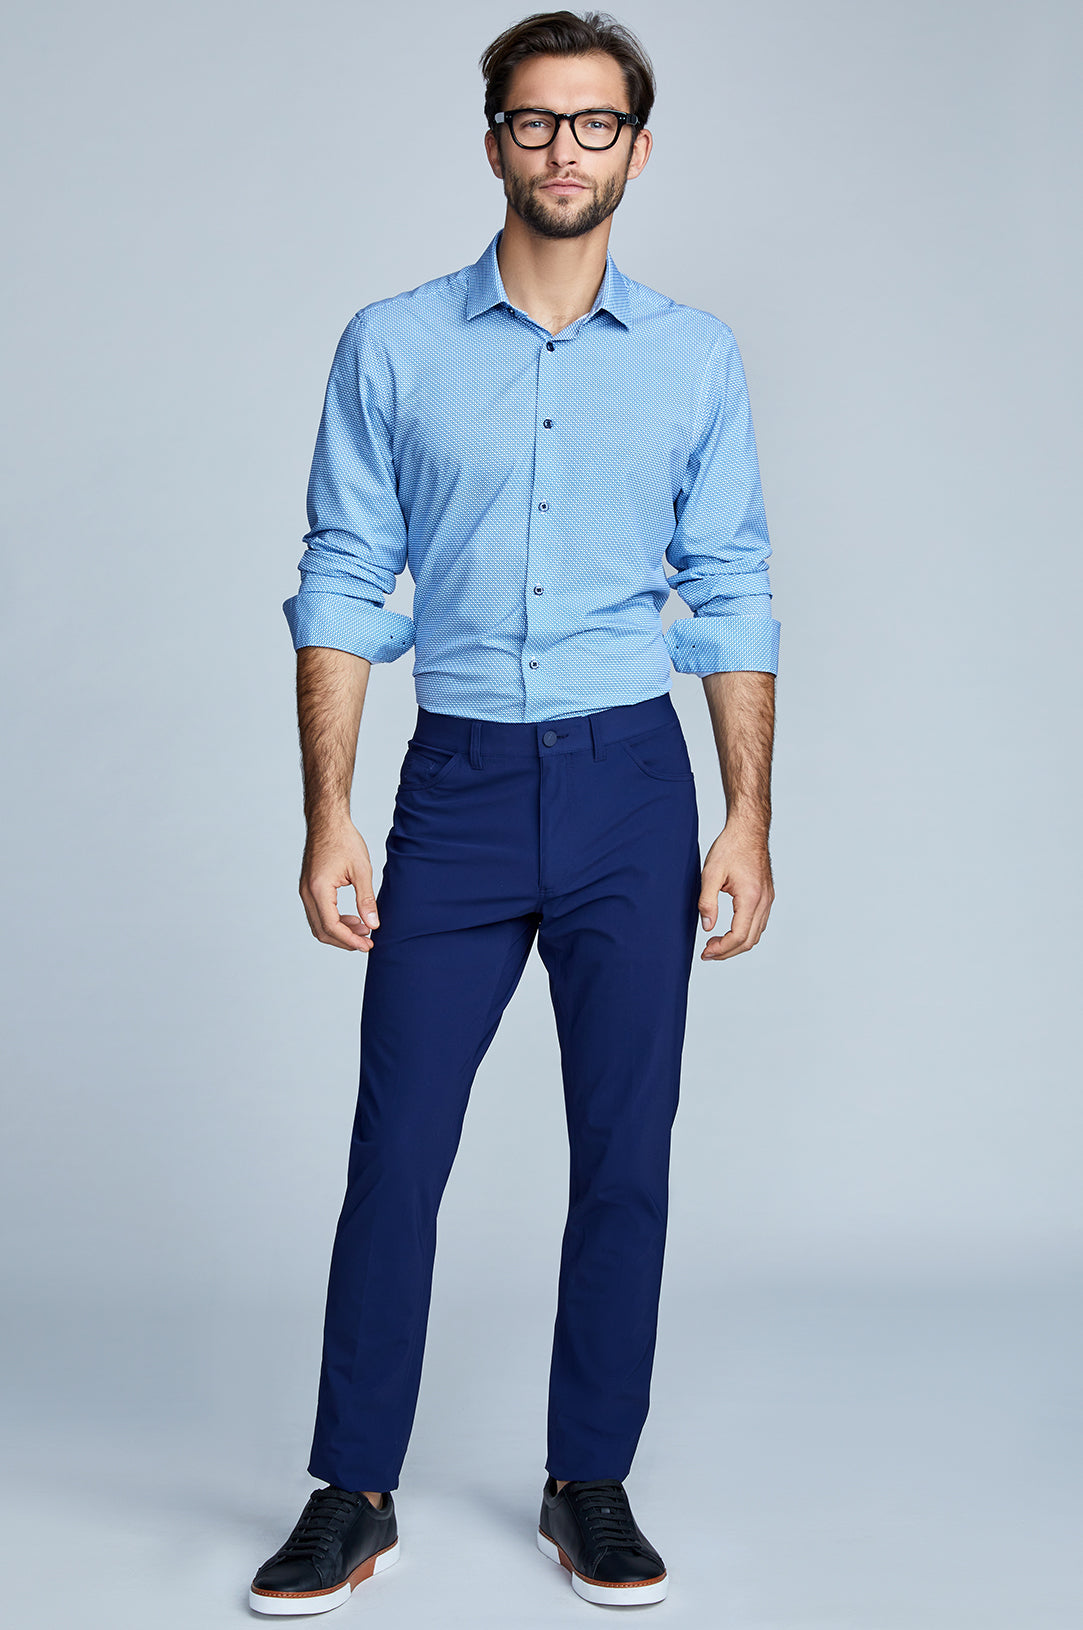 Navy Blue Dress Pants Trousers Tailor Made | Starting At 45$